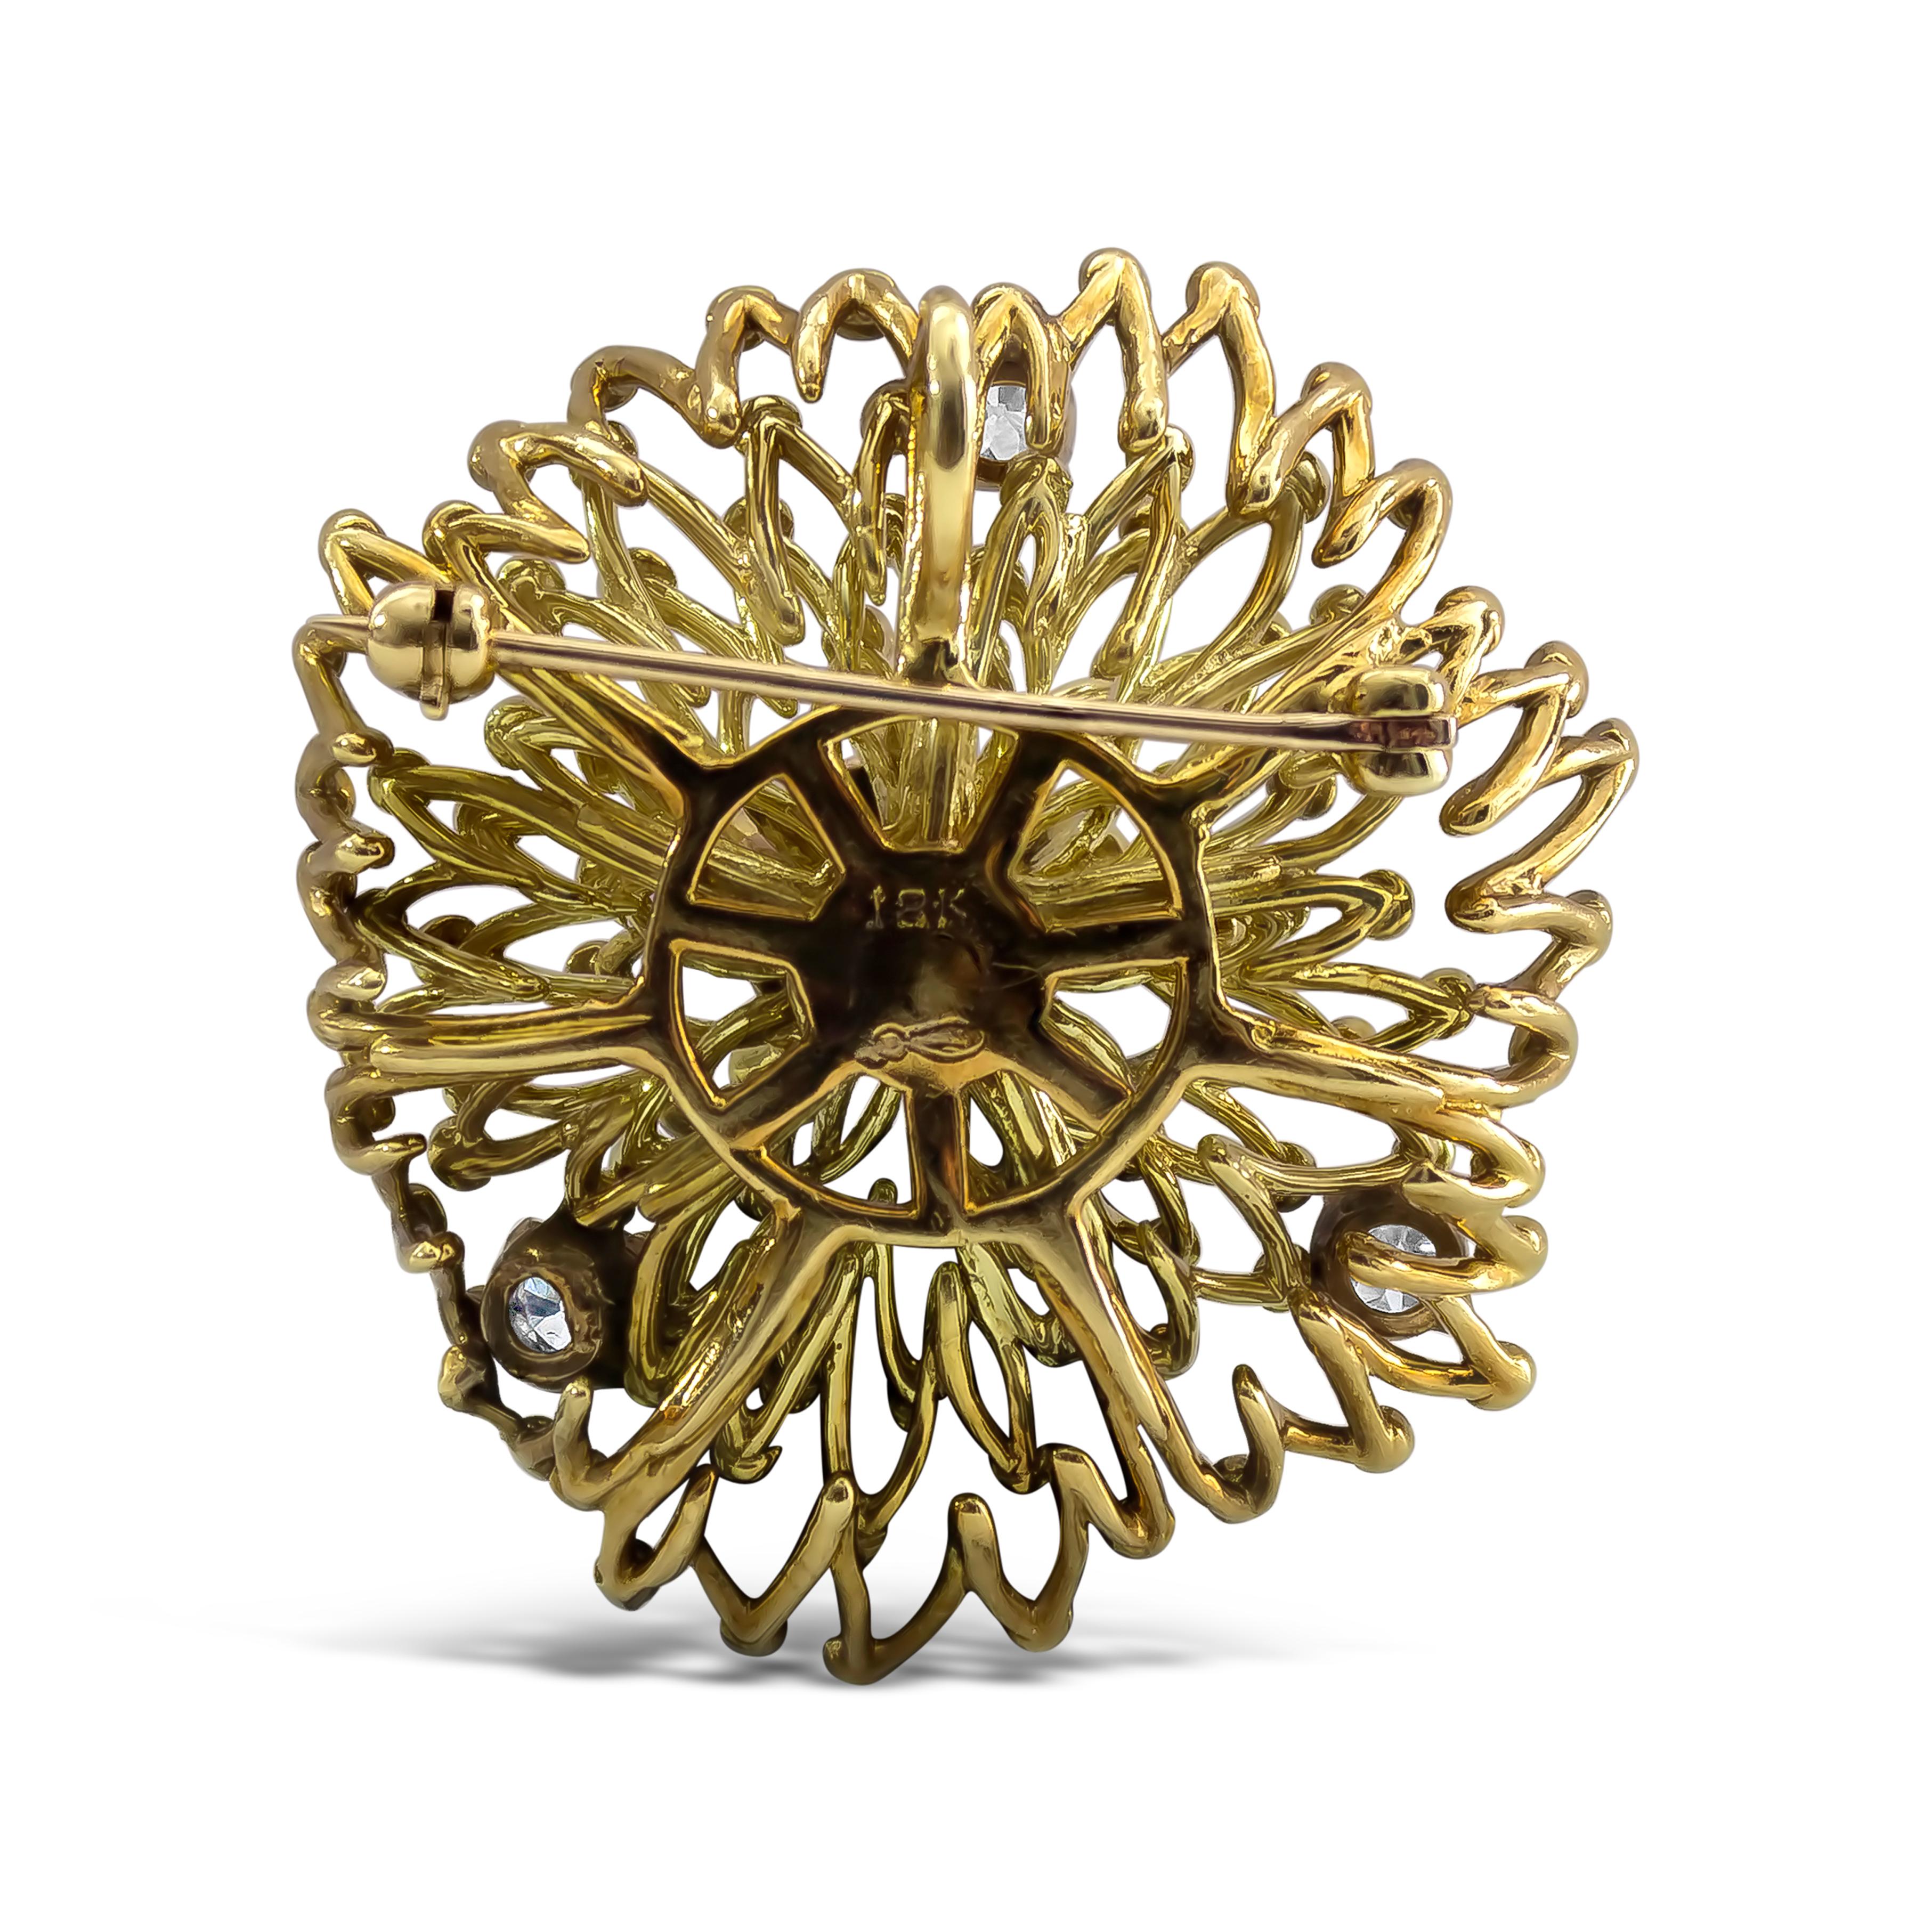 Showcasing an antique intricately designed brooch made in 18K Yellow Gold, accented with clusters of Old European cut diamonds weighing 0.98 carats total.


